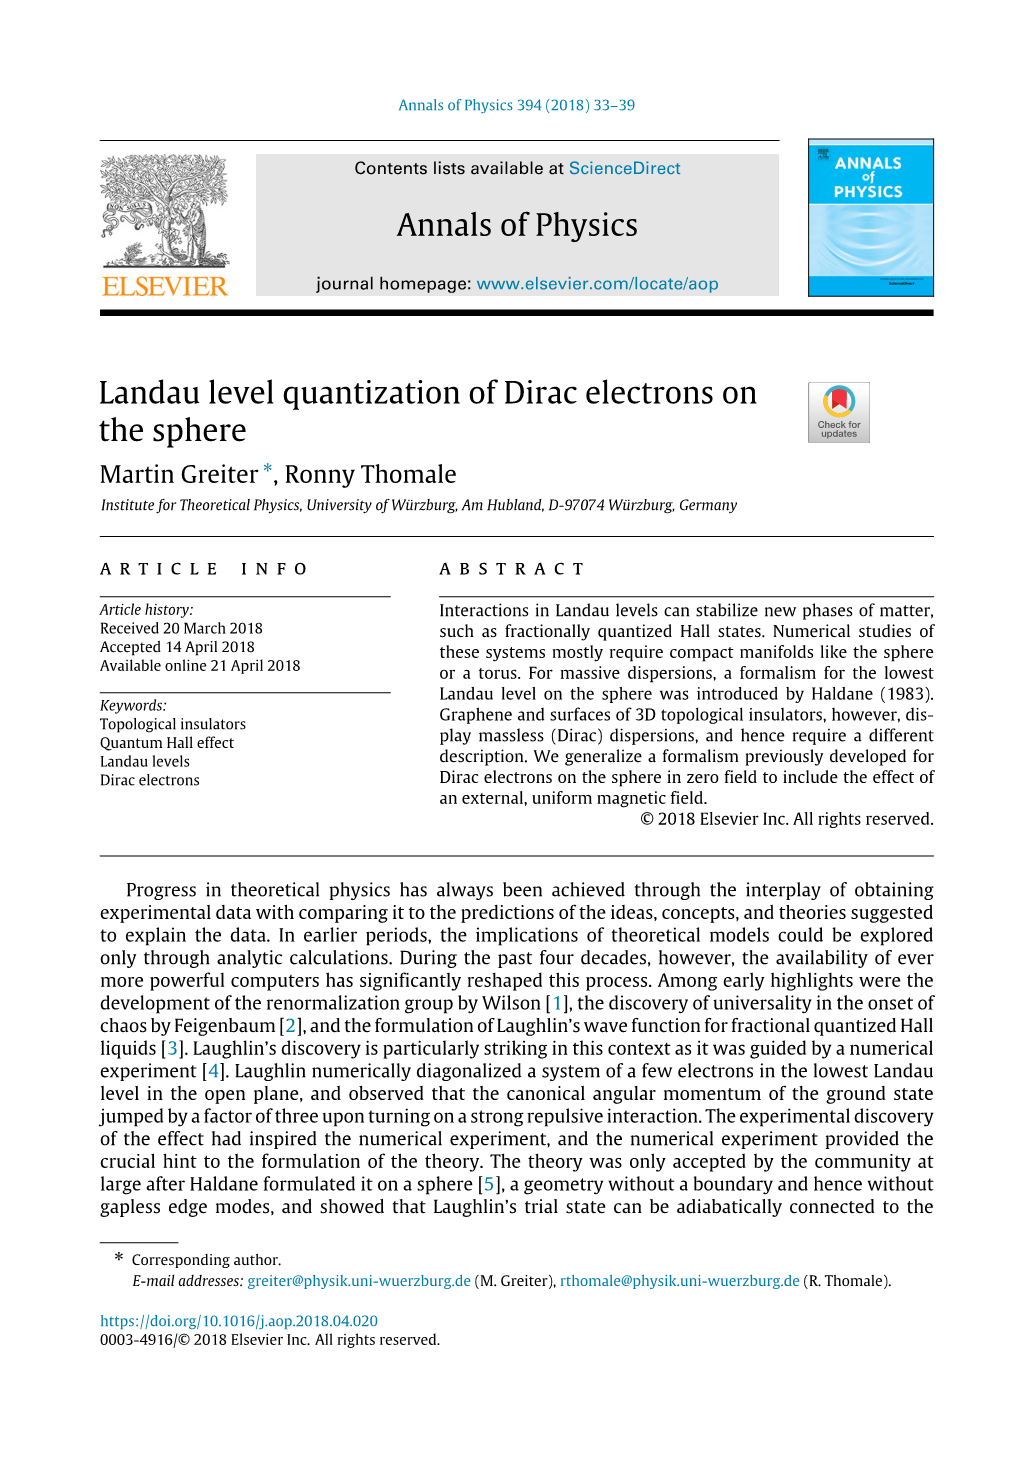 Annals of Physics Landau Level Quantization of Dirac Electrons on the Sphere